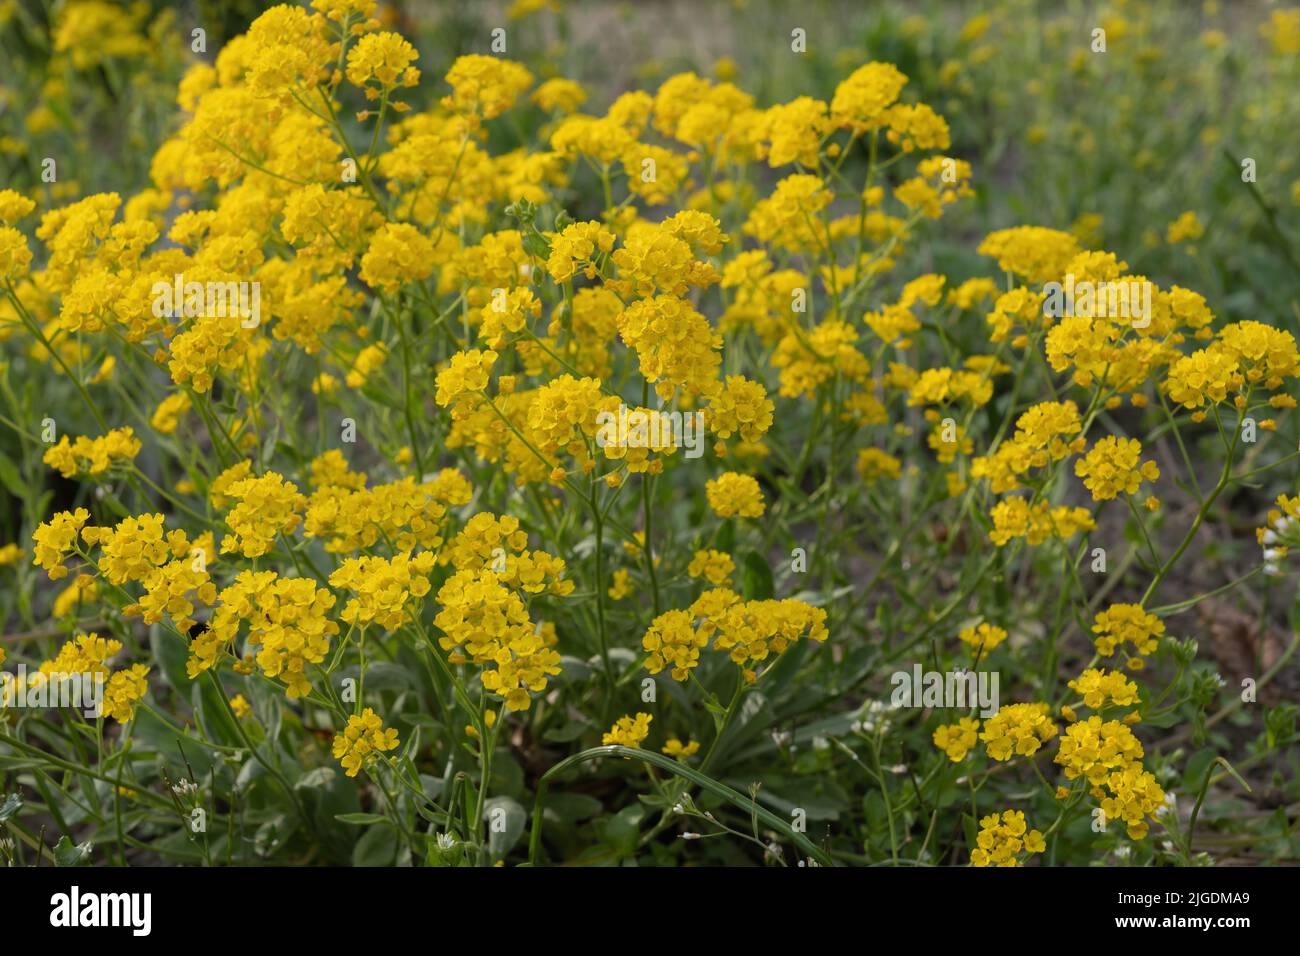 Basket of Gold or Golden Alyssum (Aurinia saxatilis) yellow blooming flowers, evergreen parennial plant in the family Brassicaceae, native to Asia and Stock Photo